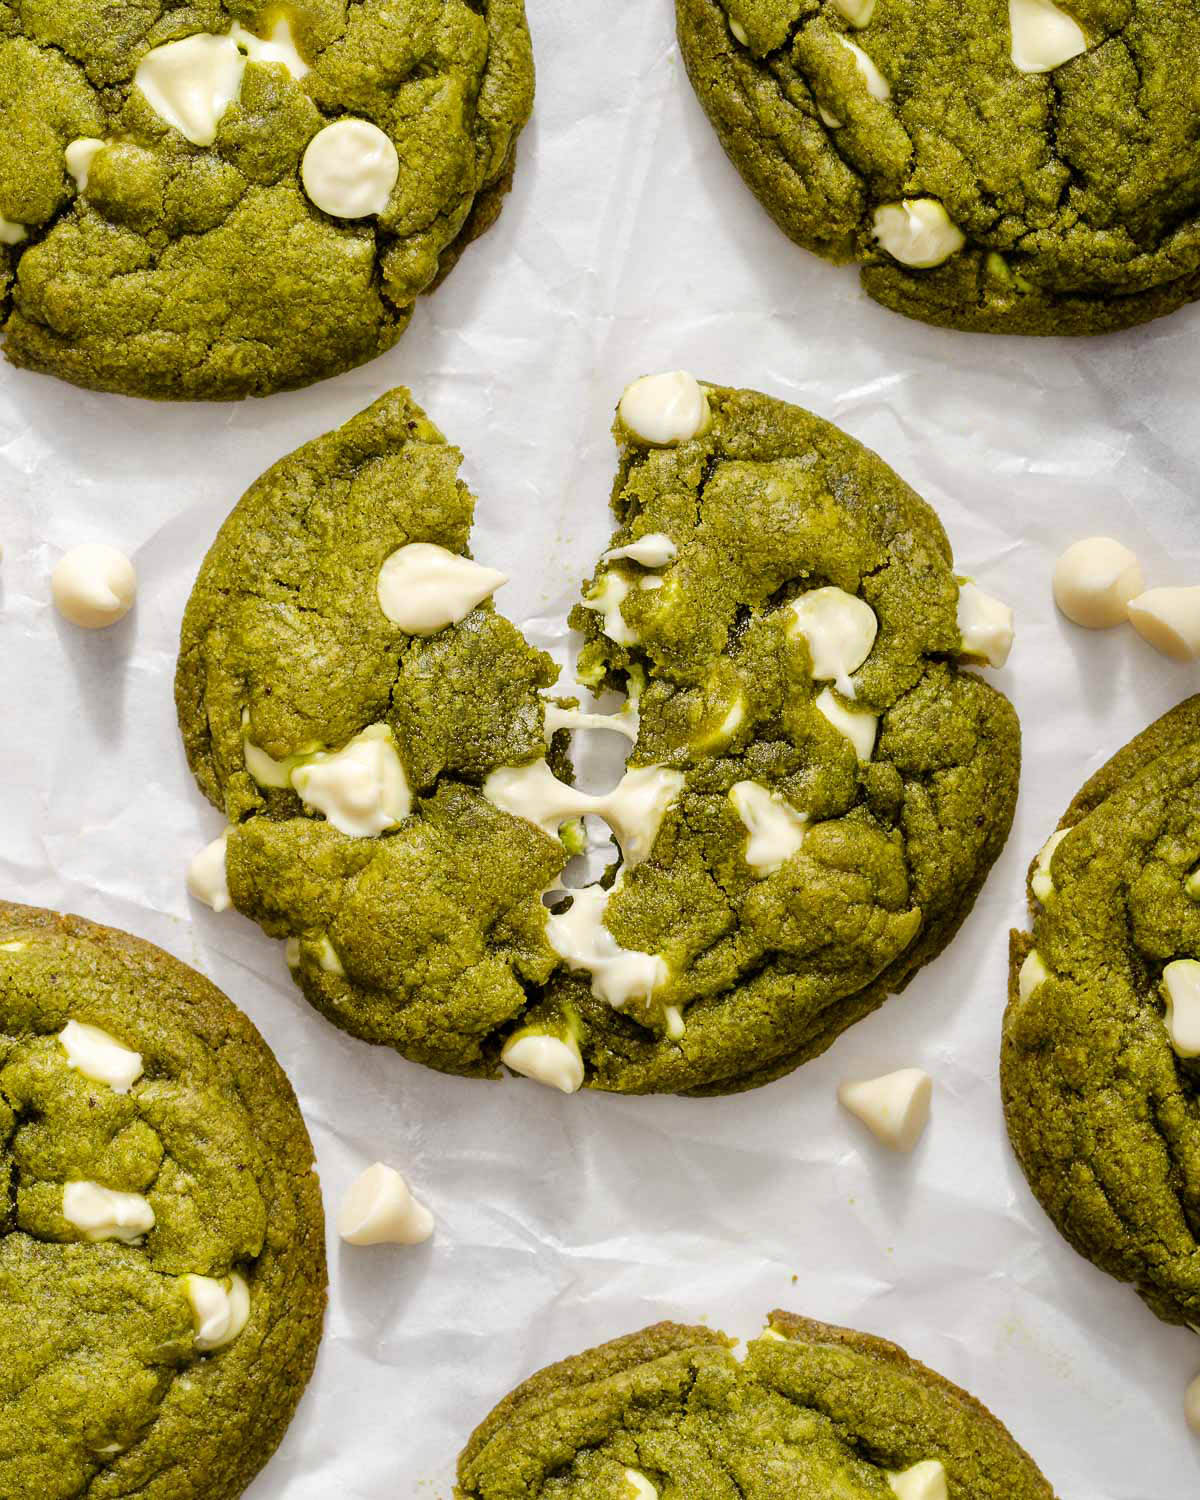 A white chocolate chip matcha cookie slightly torn open to show the gooey white chocolate.